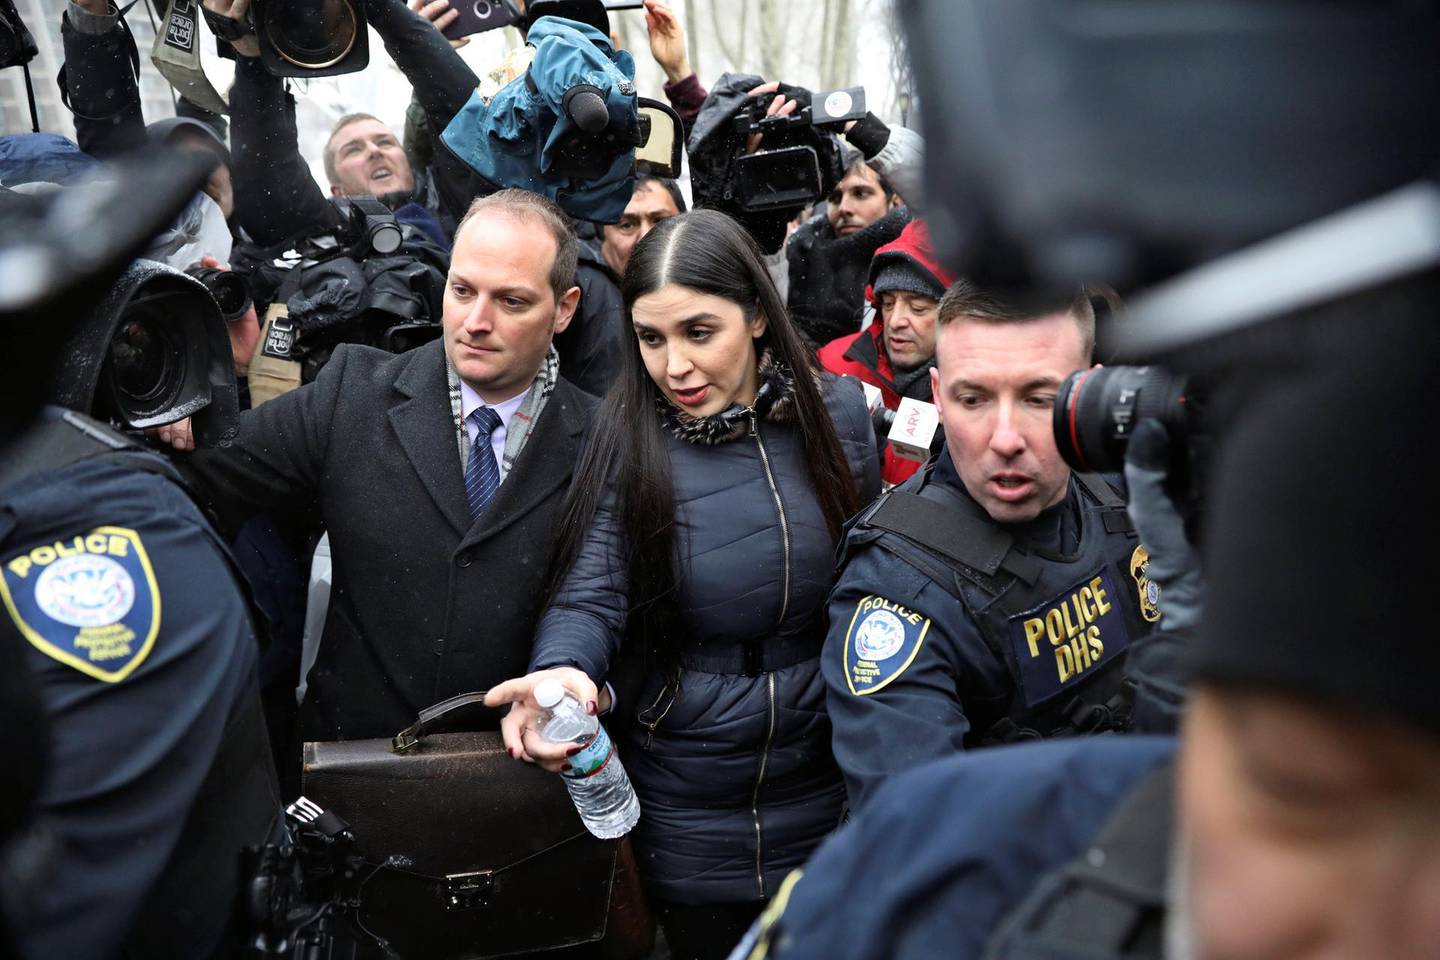 Emma Coronel Aispuro, the wife of Joaquin Guzman, departs after the trial of Mexican drug lord Guzman, known as "El Chapo", is seen at the Brooklyn Federal Courthouse, in New York, U.S., February 12, 2019. REUTERS/Brendan McDermid